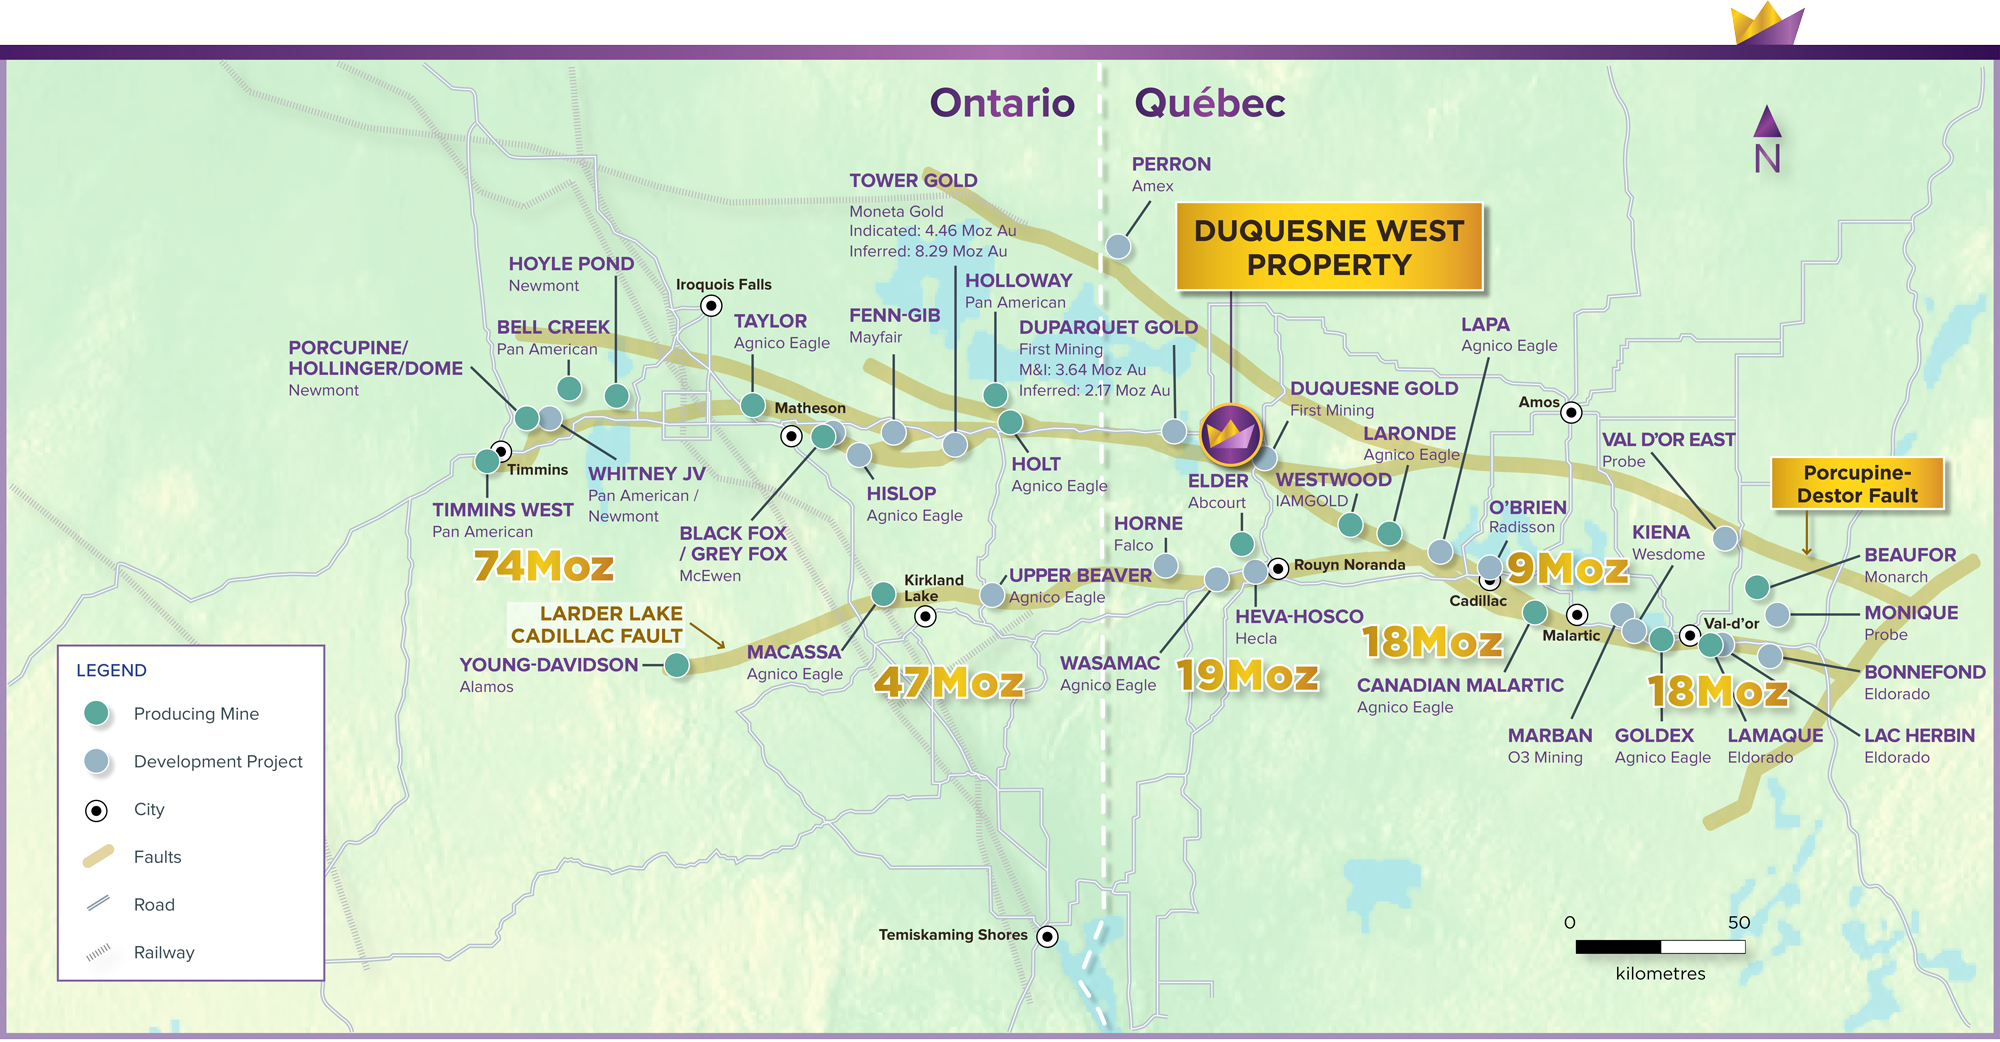 Dusquesne West Location Map